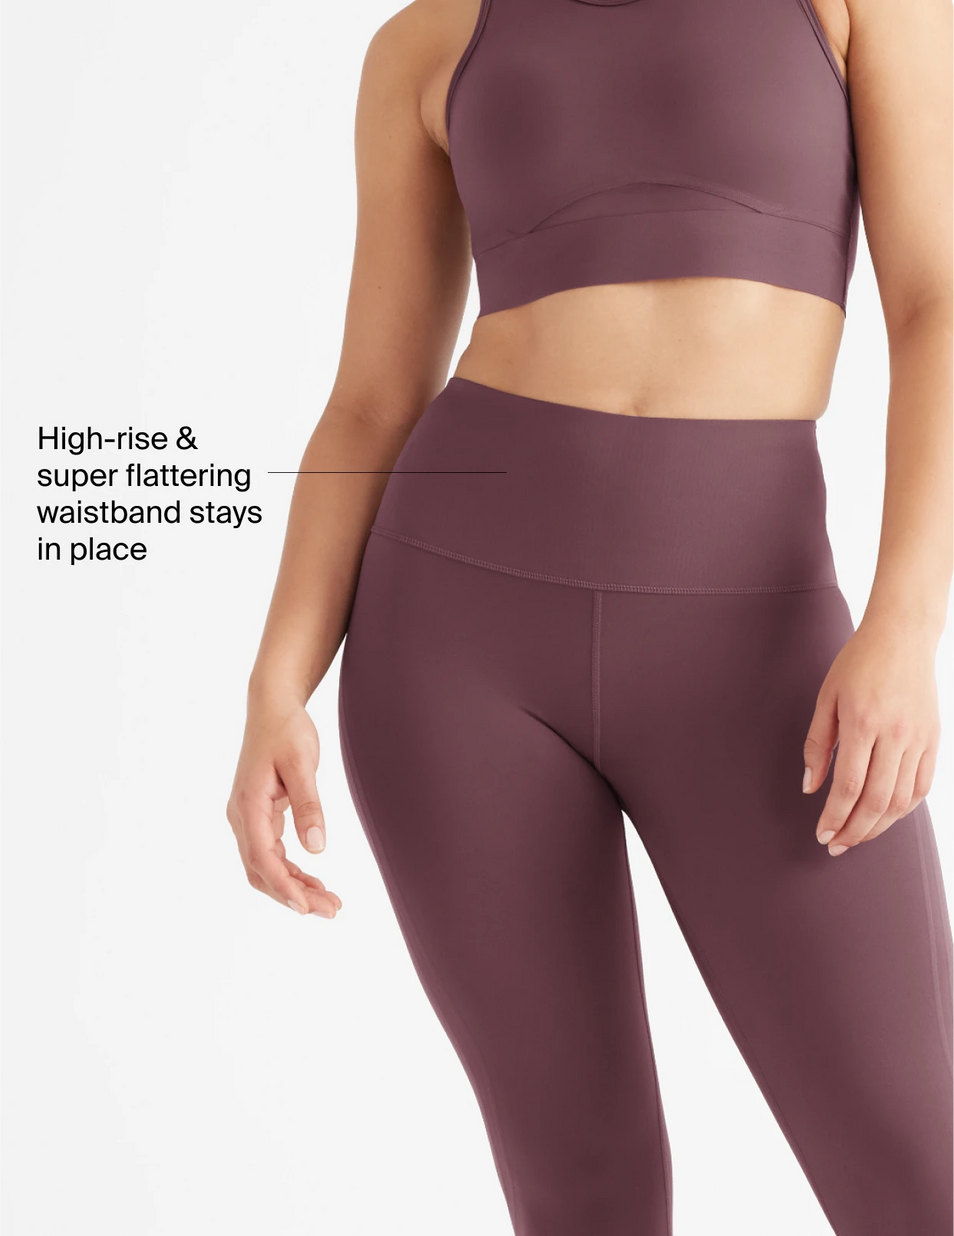 High-rise & super flattering waistband stays in place